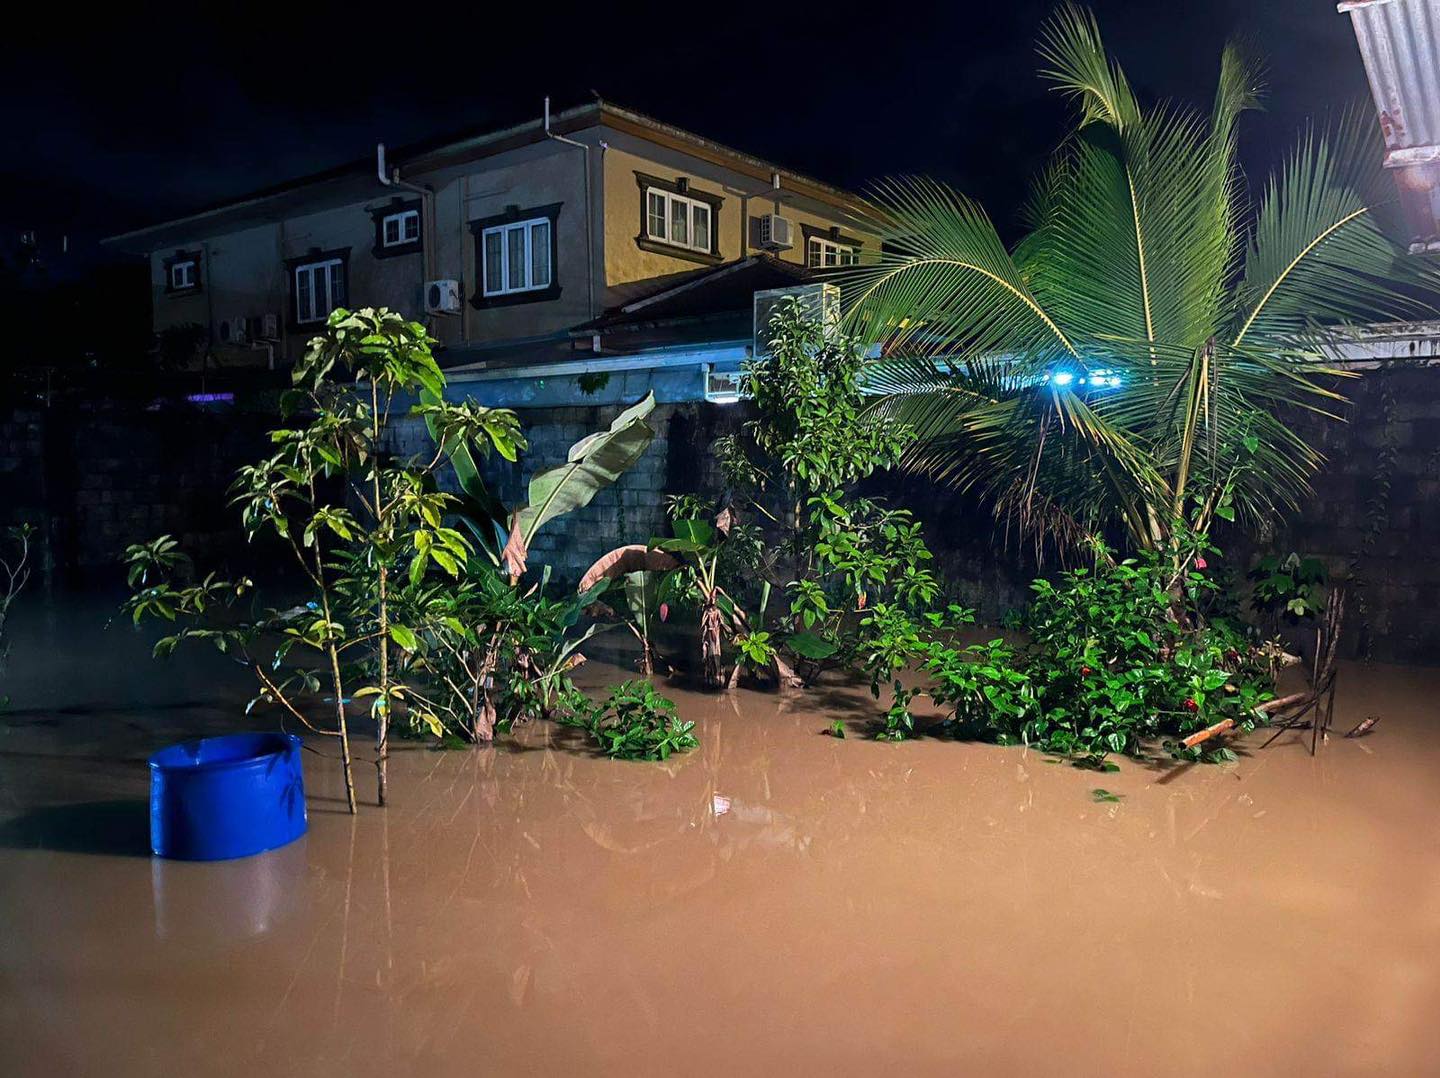 Bamboo Village Council President says villagers are “thankful” after flood argument